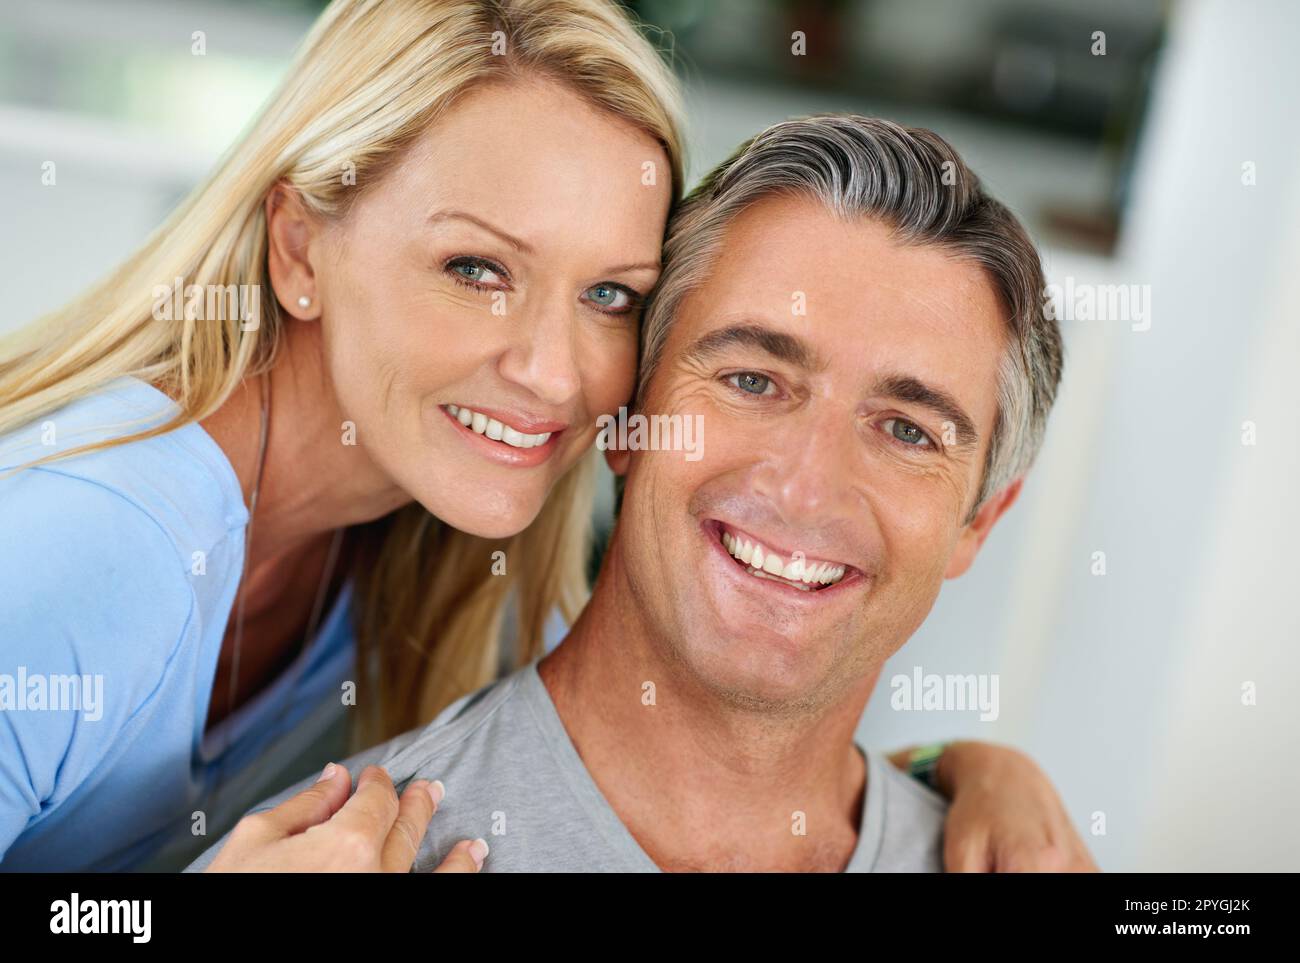 We live a blessed life. Portrait of a smiling mature couple at home. Stock Photo